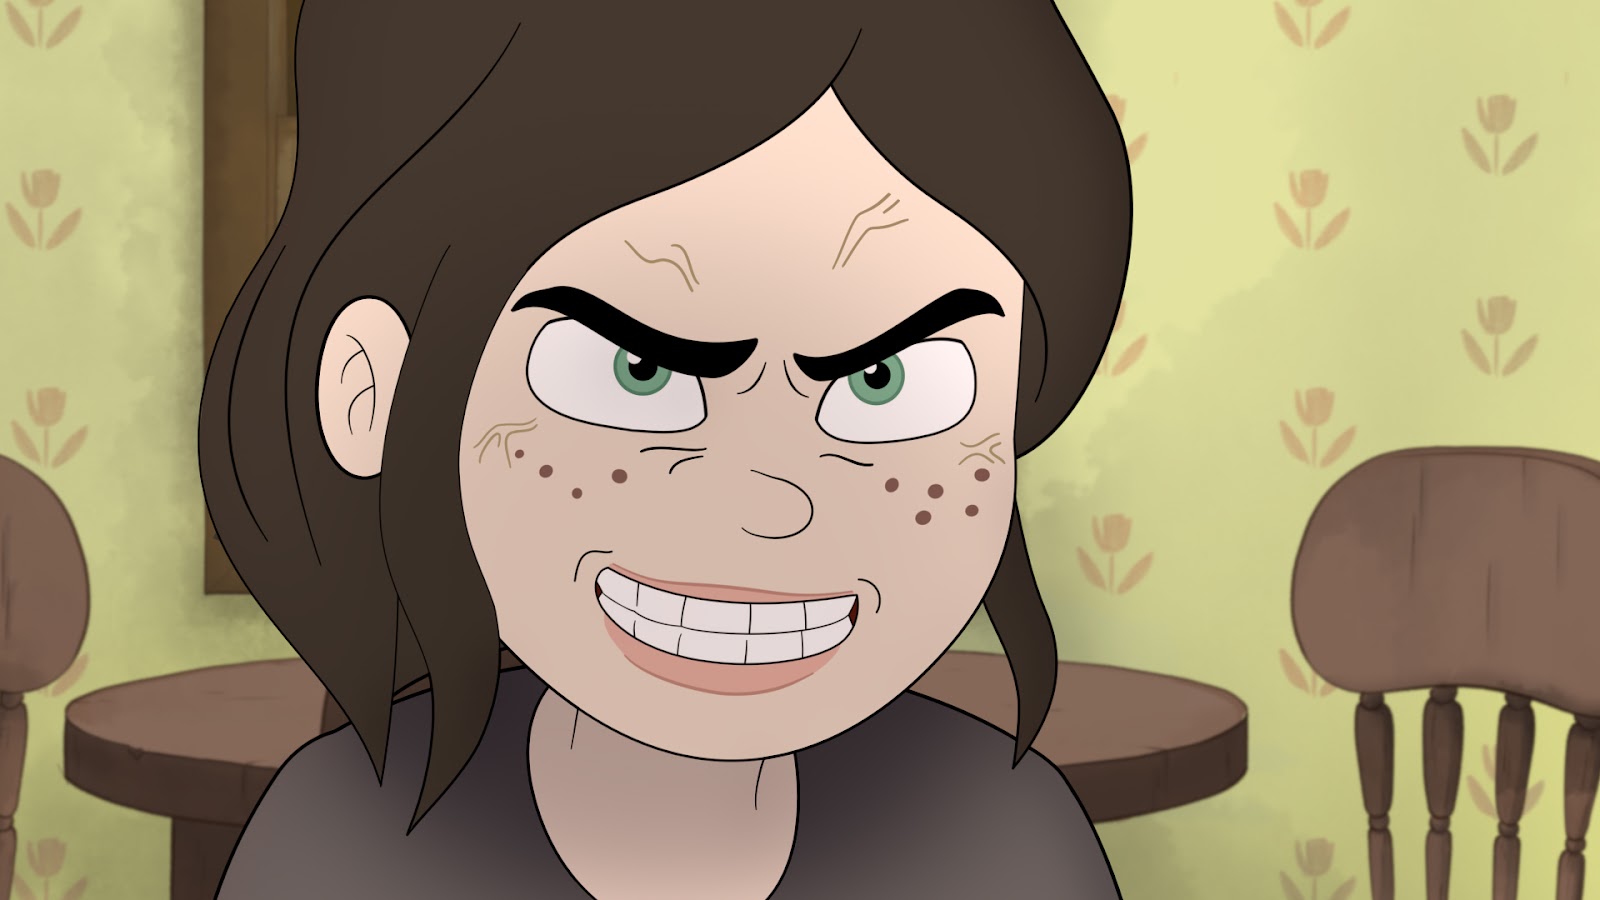 Christina "Chrissy" (voiced by Lucy DeVito) in Darcy Fowler, Seth Kirschner, and Kieran Valla's FX animated horror comedy series, ‘Little Demon’ Season 1Episode 2—”Possession Obsession”. Credits to FXX.